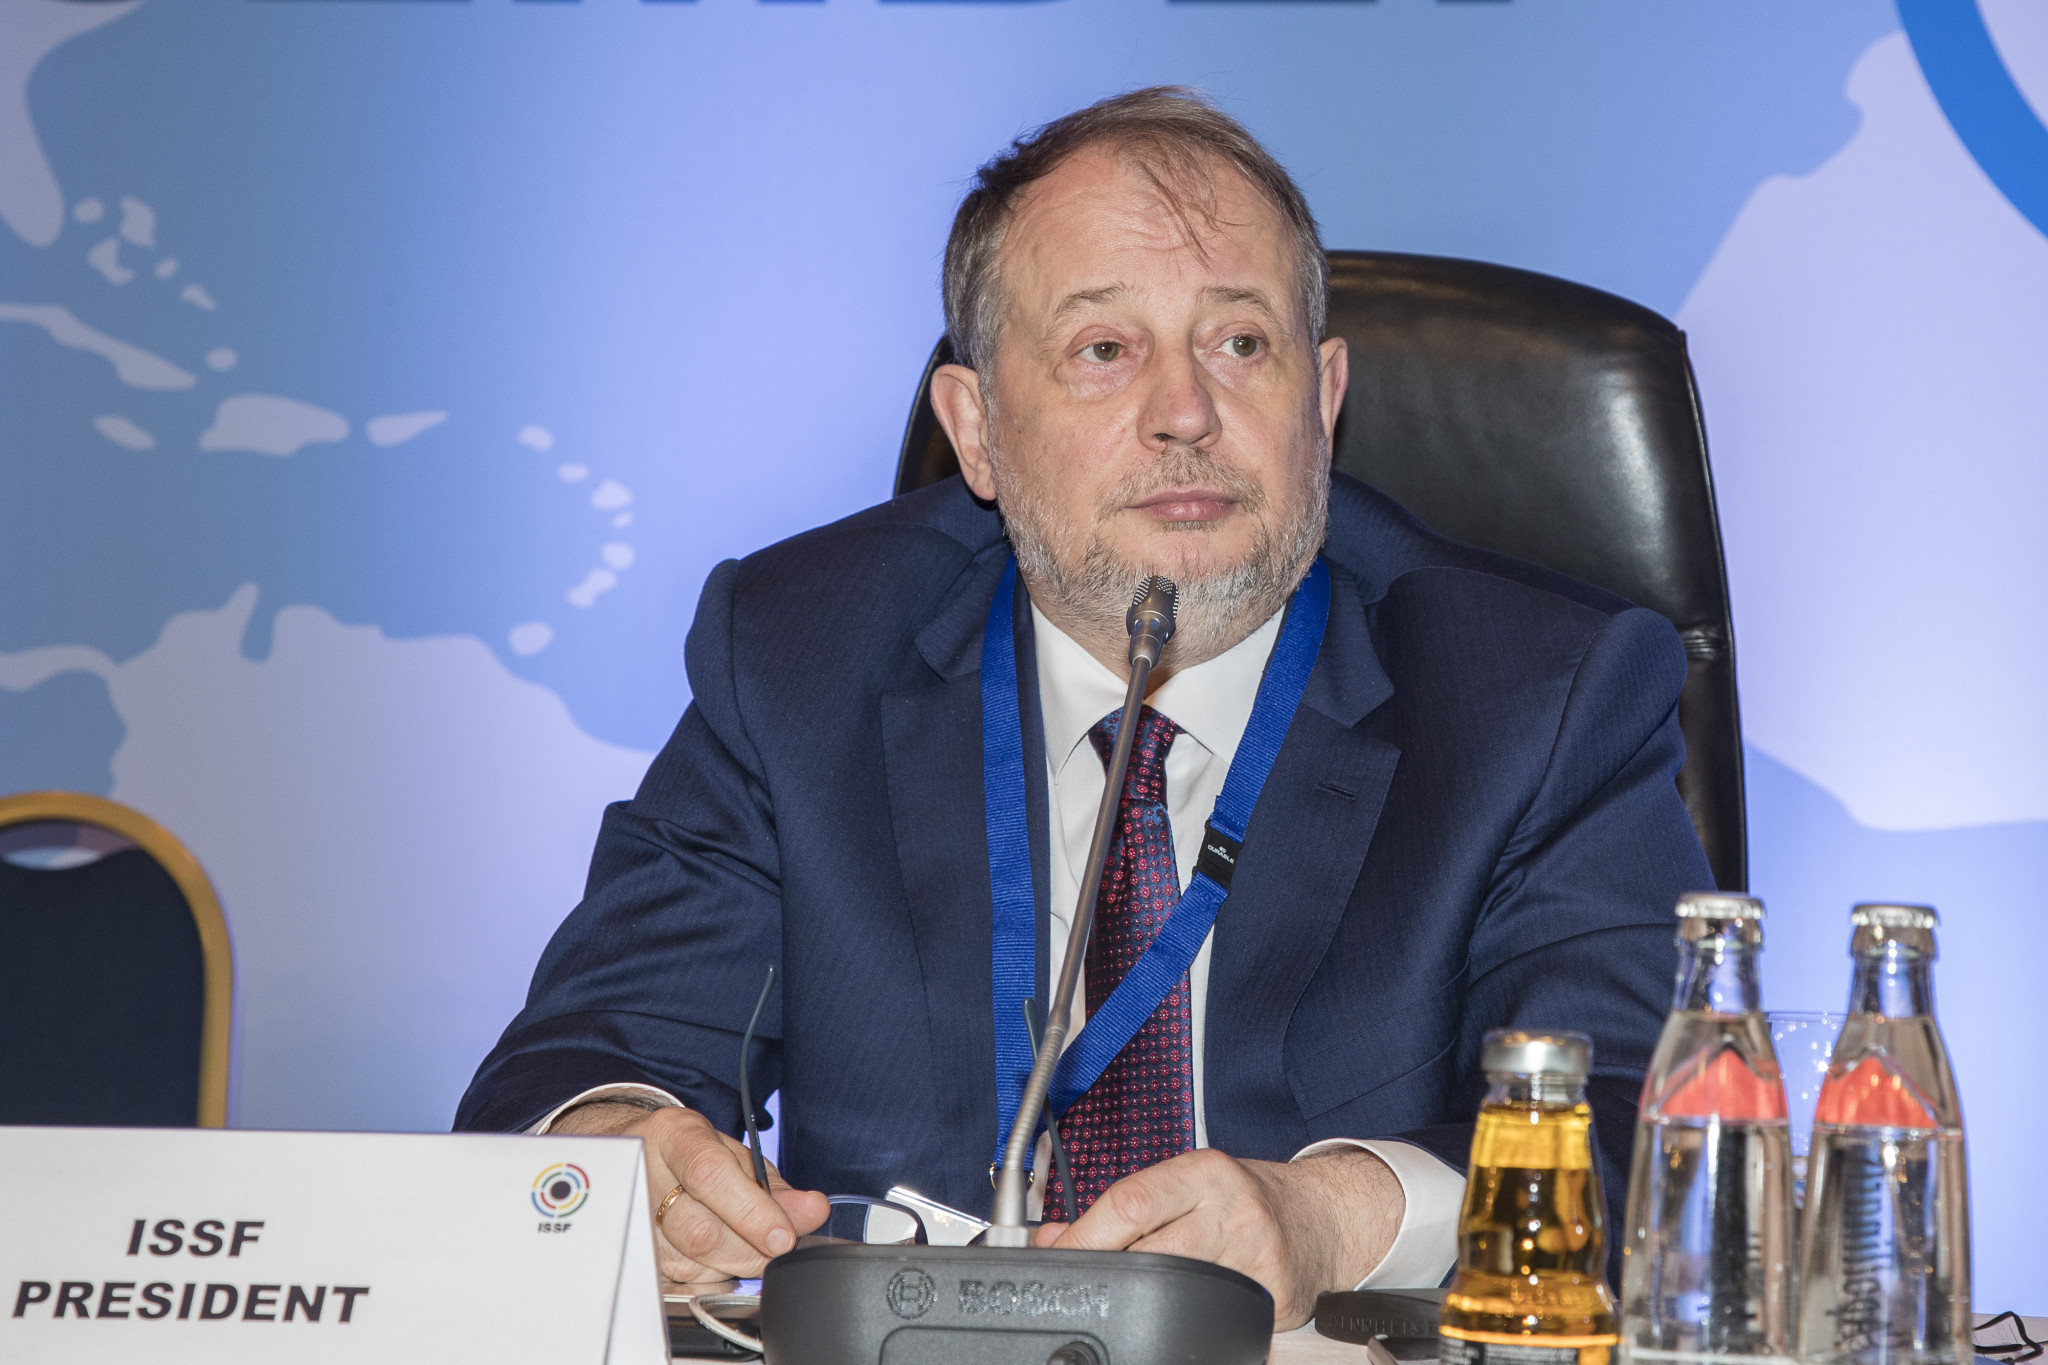 Newly-elected ISSF President Vladimir Lisin has committed $10 million of his own money to start a new development fund for the sport Â©ISSF